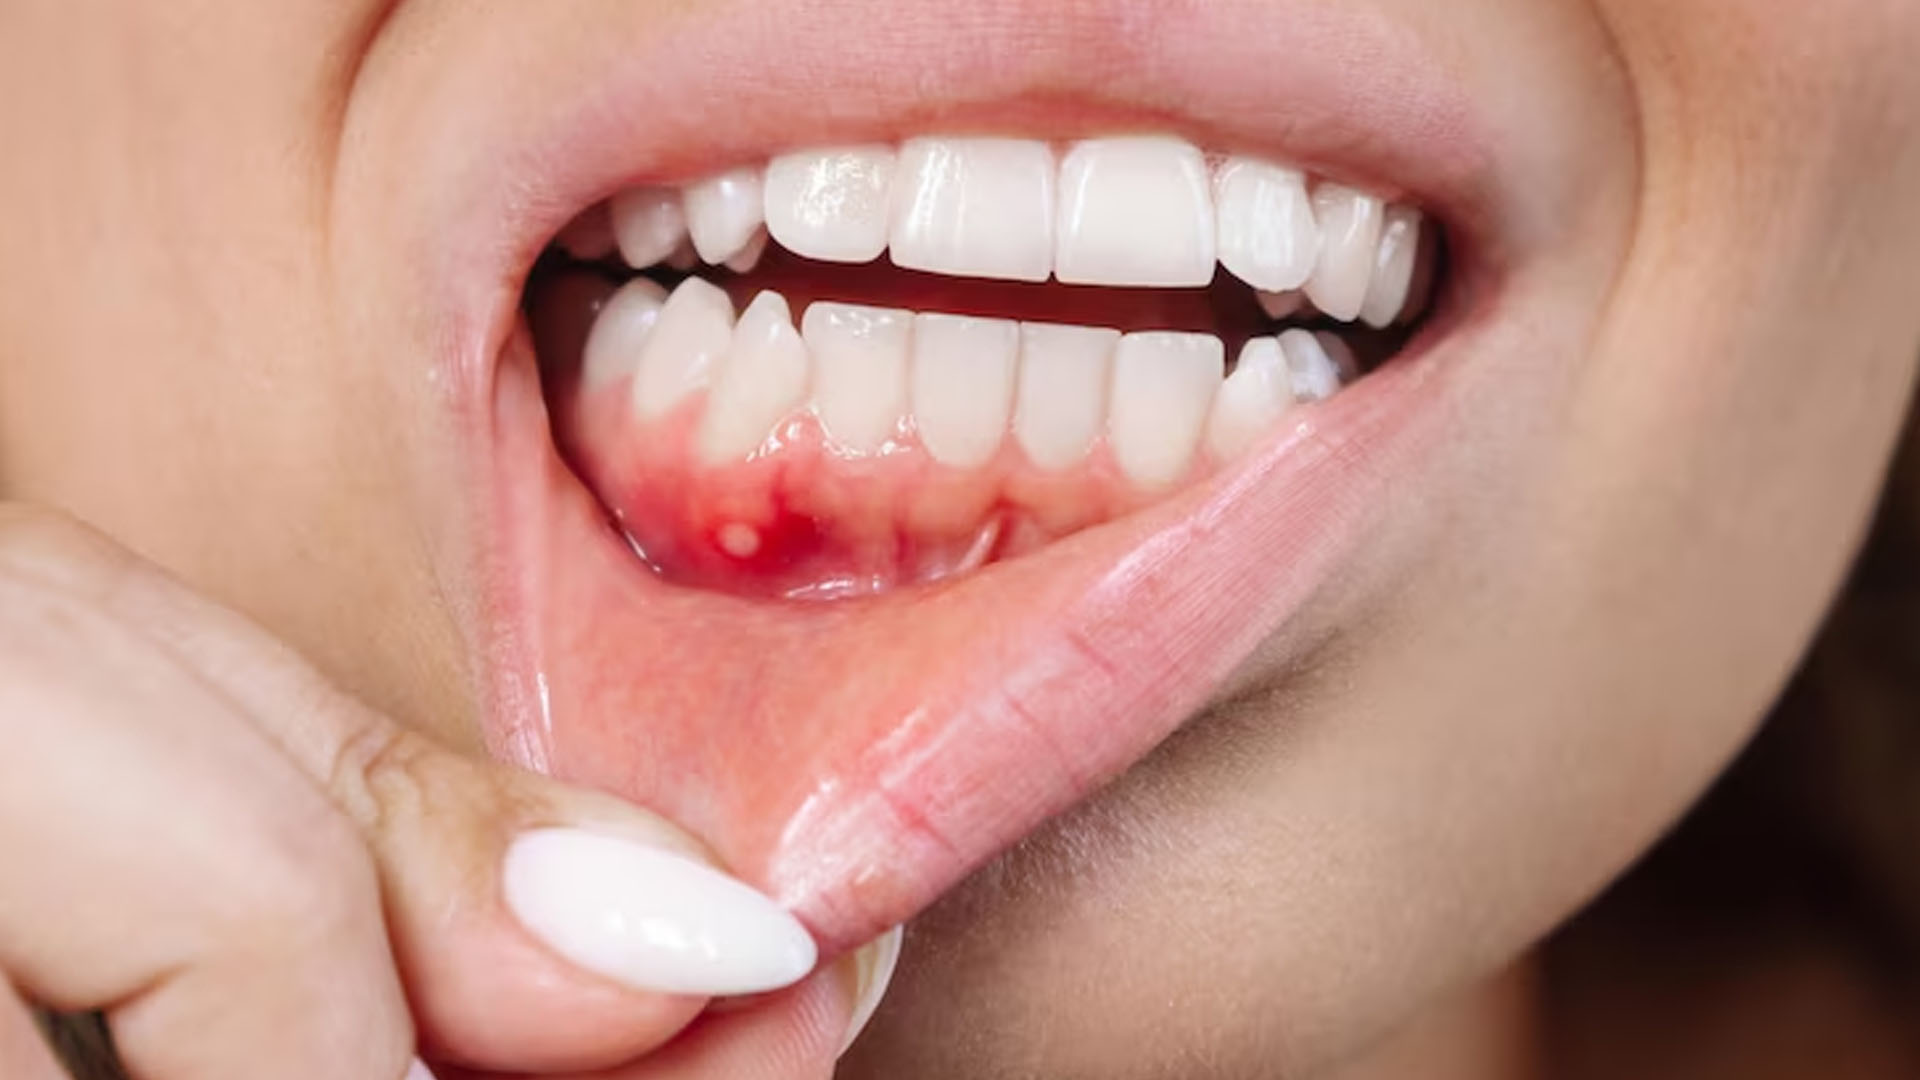 What are the Home Remedies for Removing Tartar from Teeth?